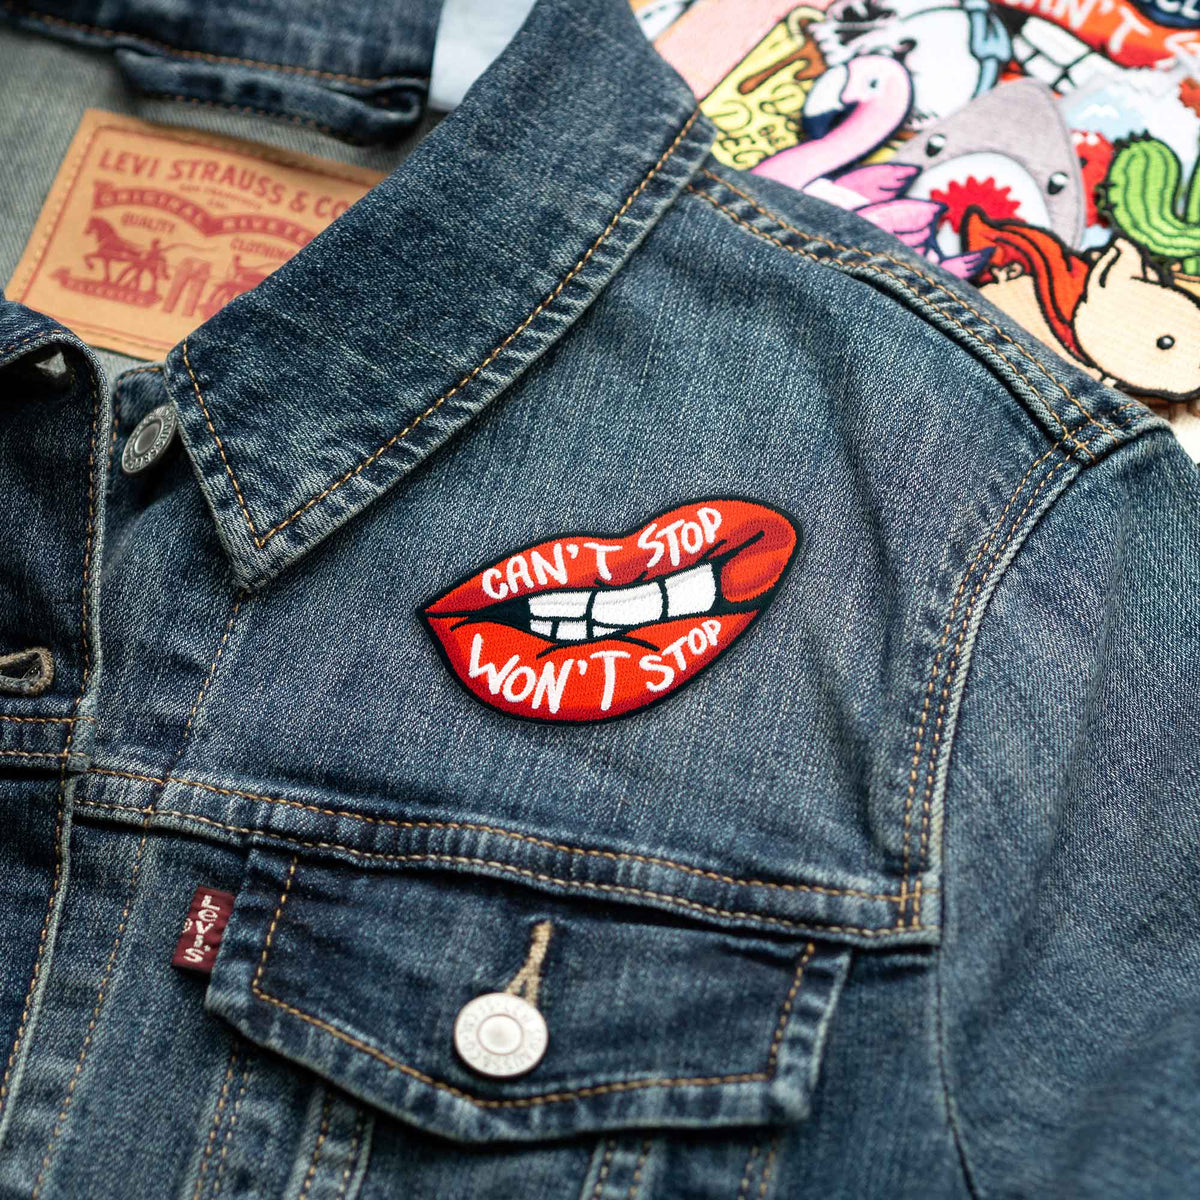 Can't Stop Won't Stop Lips patch on denim jacket